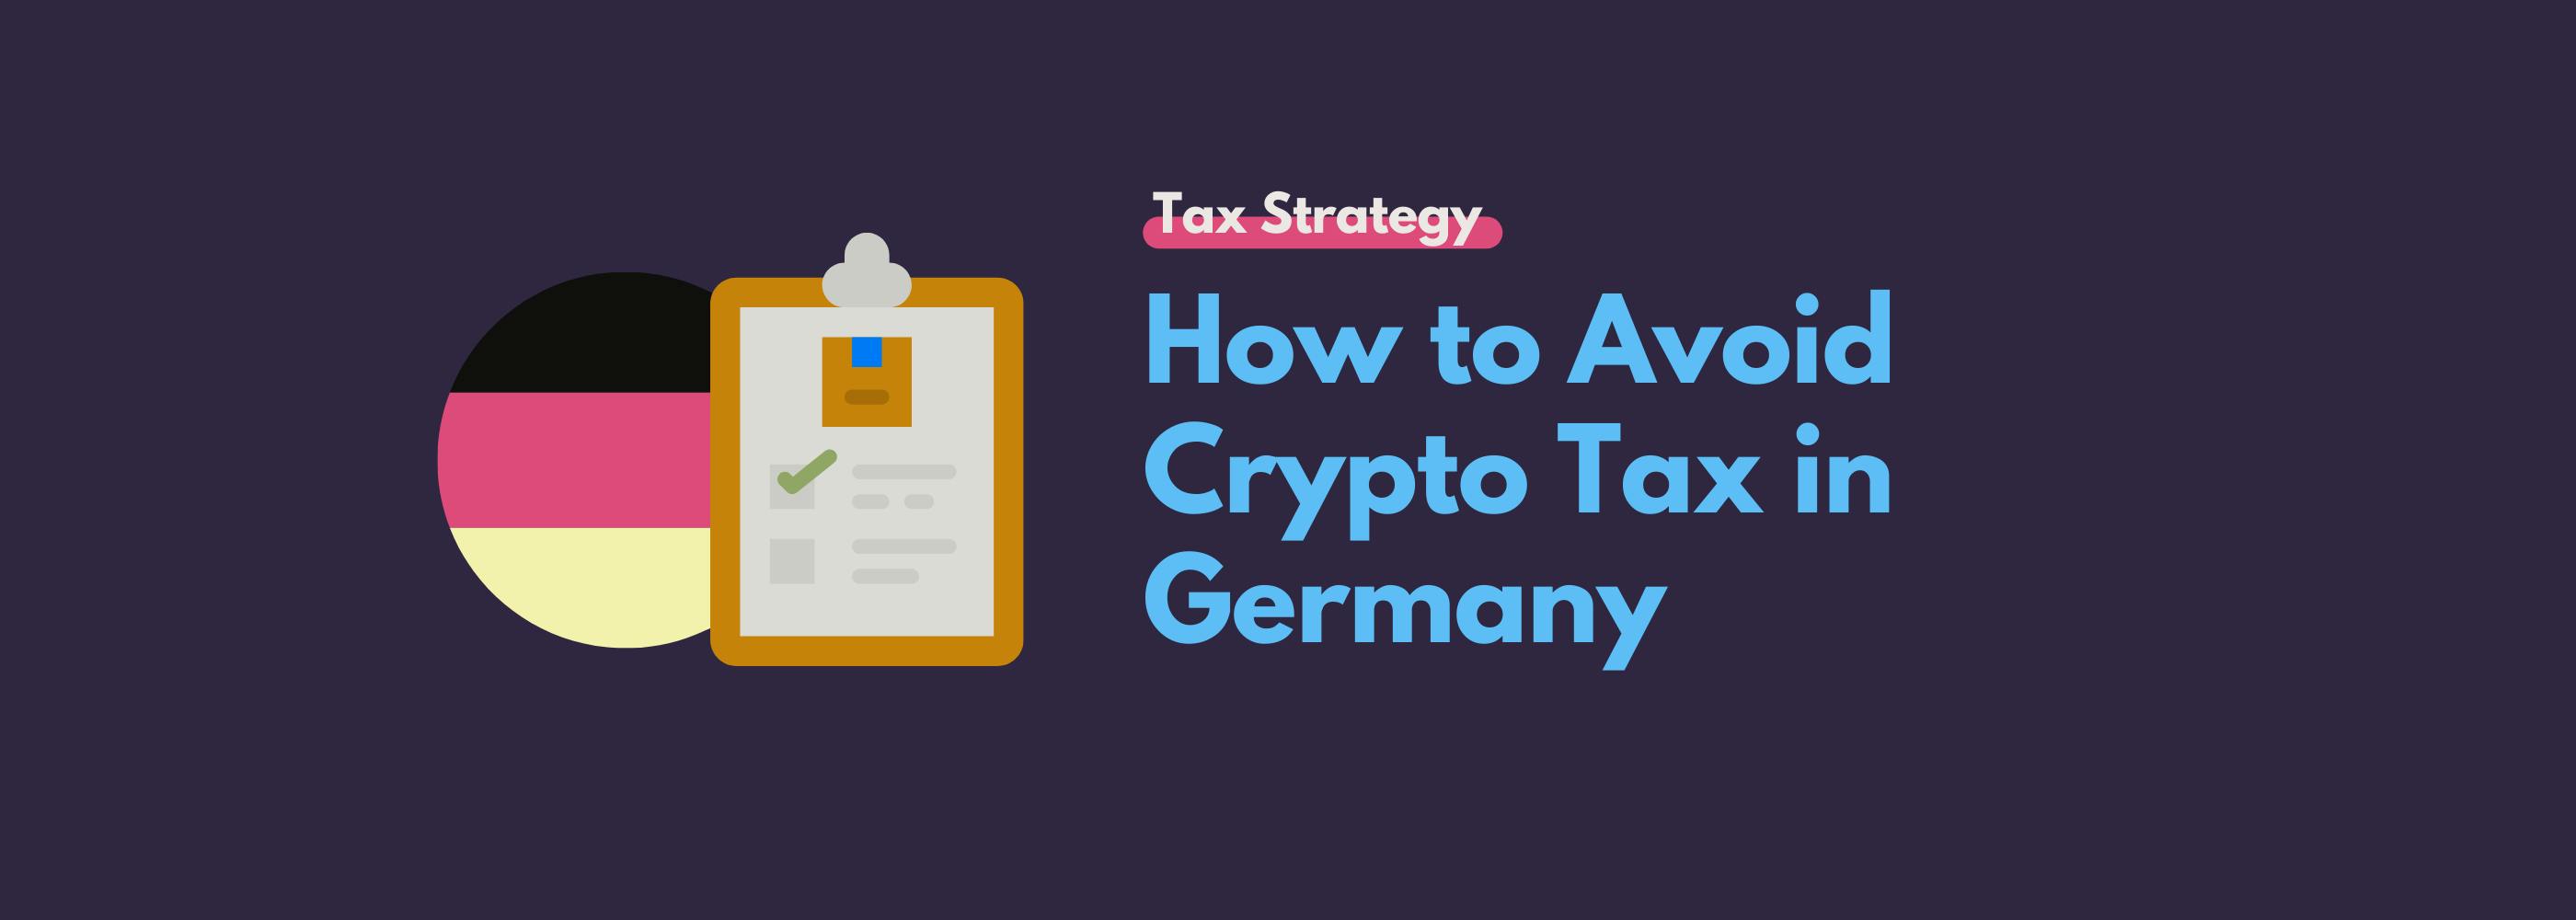 How to avoid crypto tax in Germany - legally